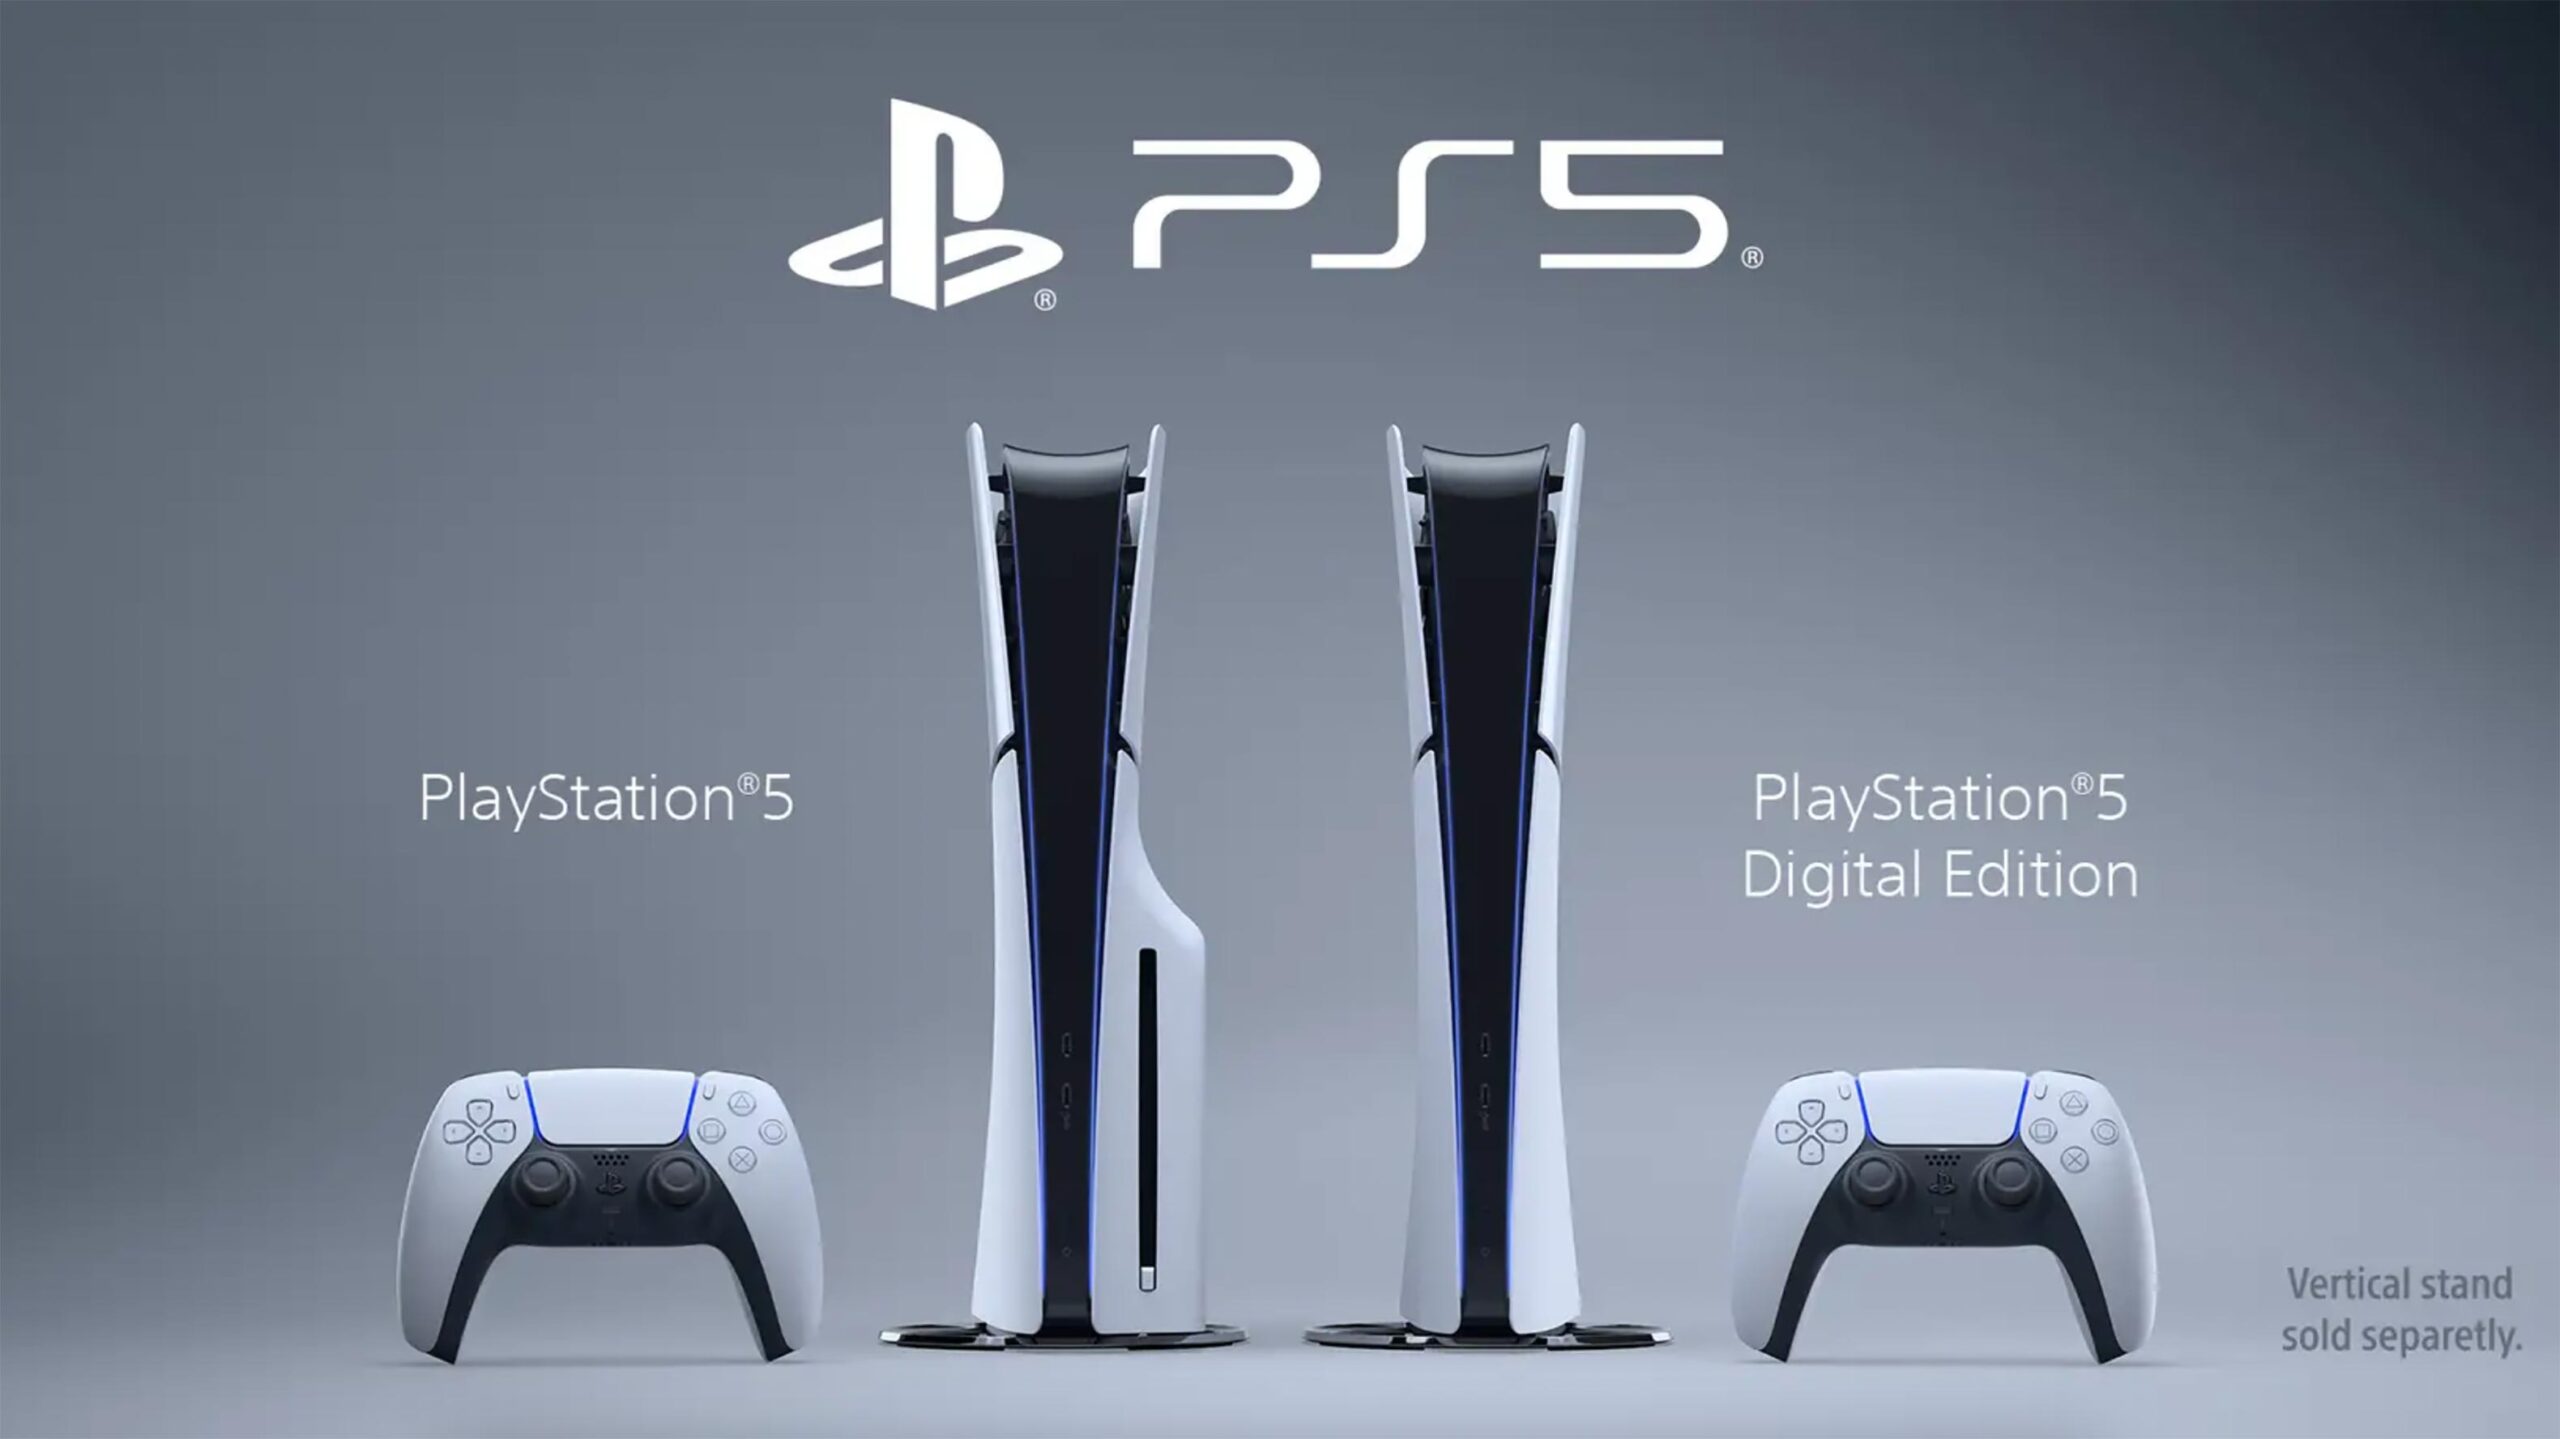 Sony’s vision for the future of gaming is internet-connected PS5 disc drives